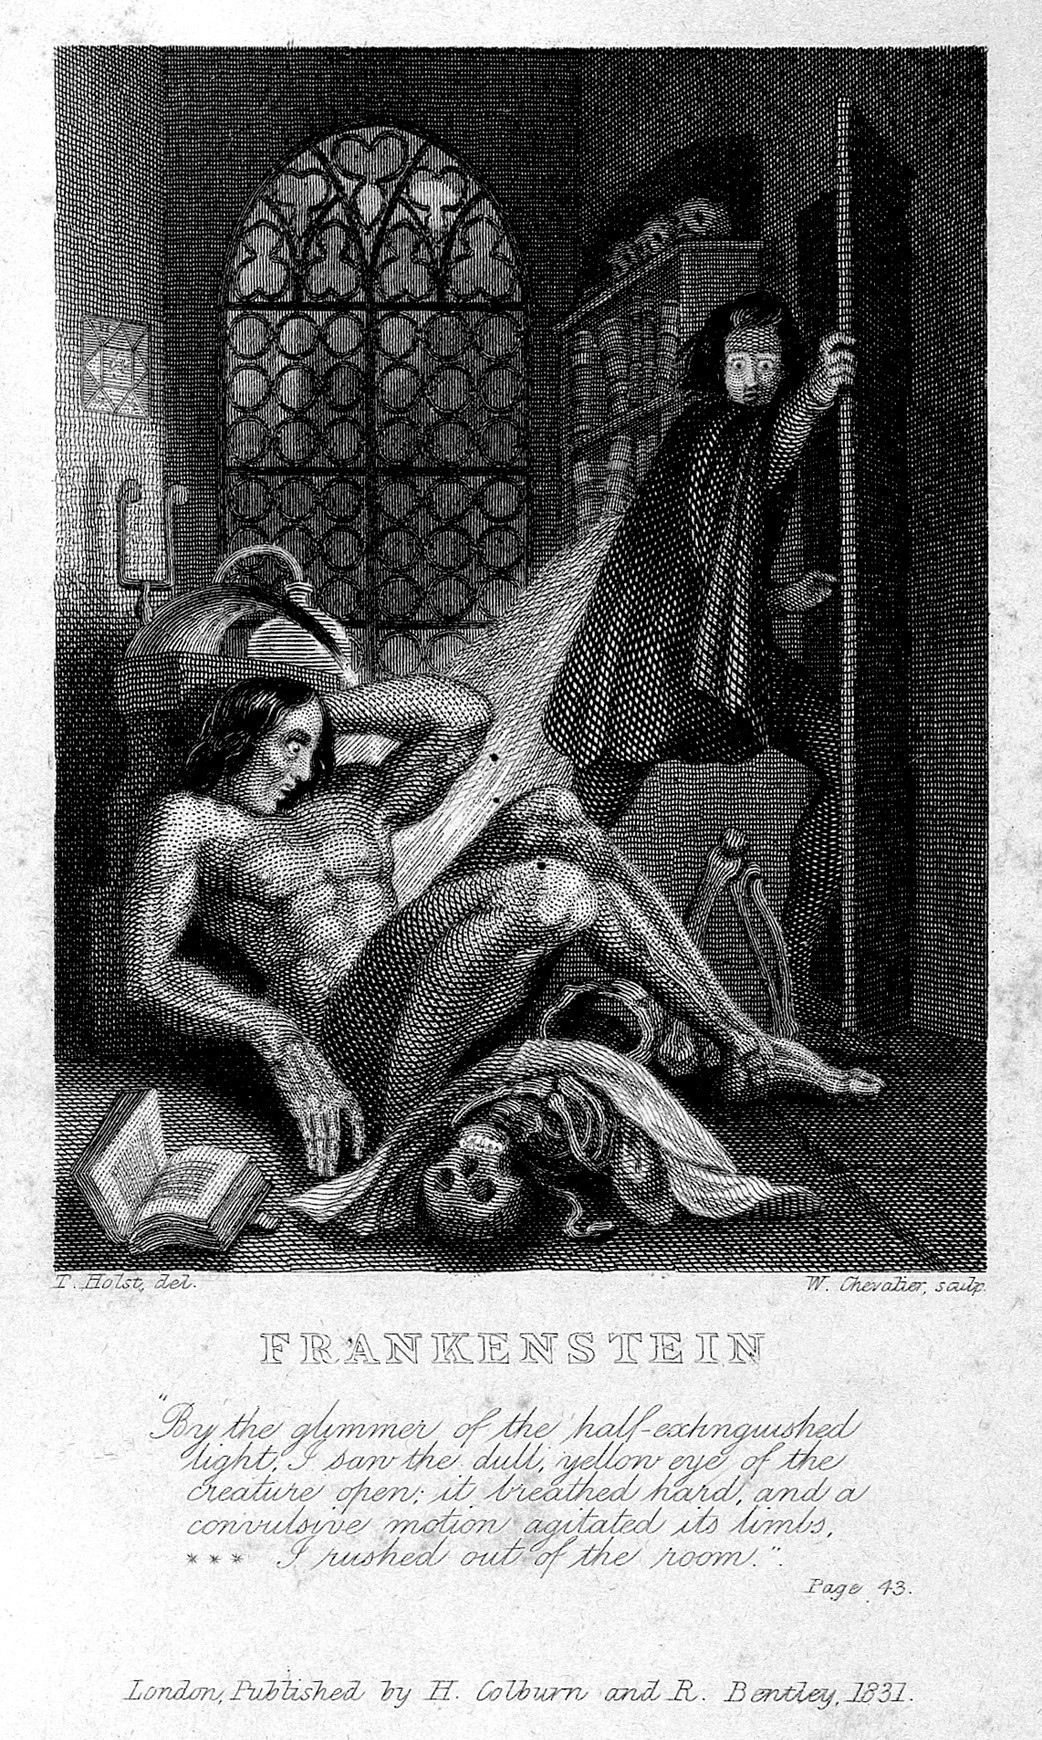 Though not explicitly referenced in the novel, galvanic experiments inspired in Mary Shelley’s imagination the possibilities of reanimating a corpse.